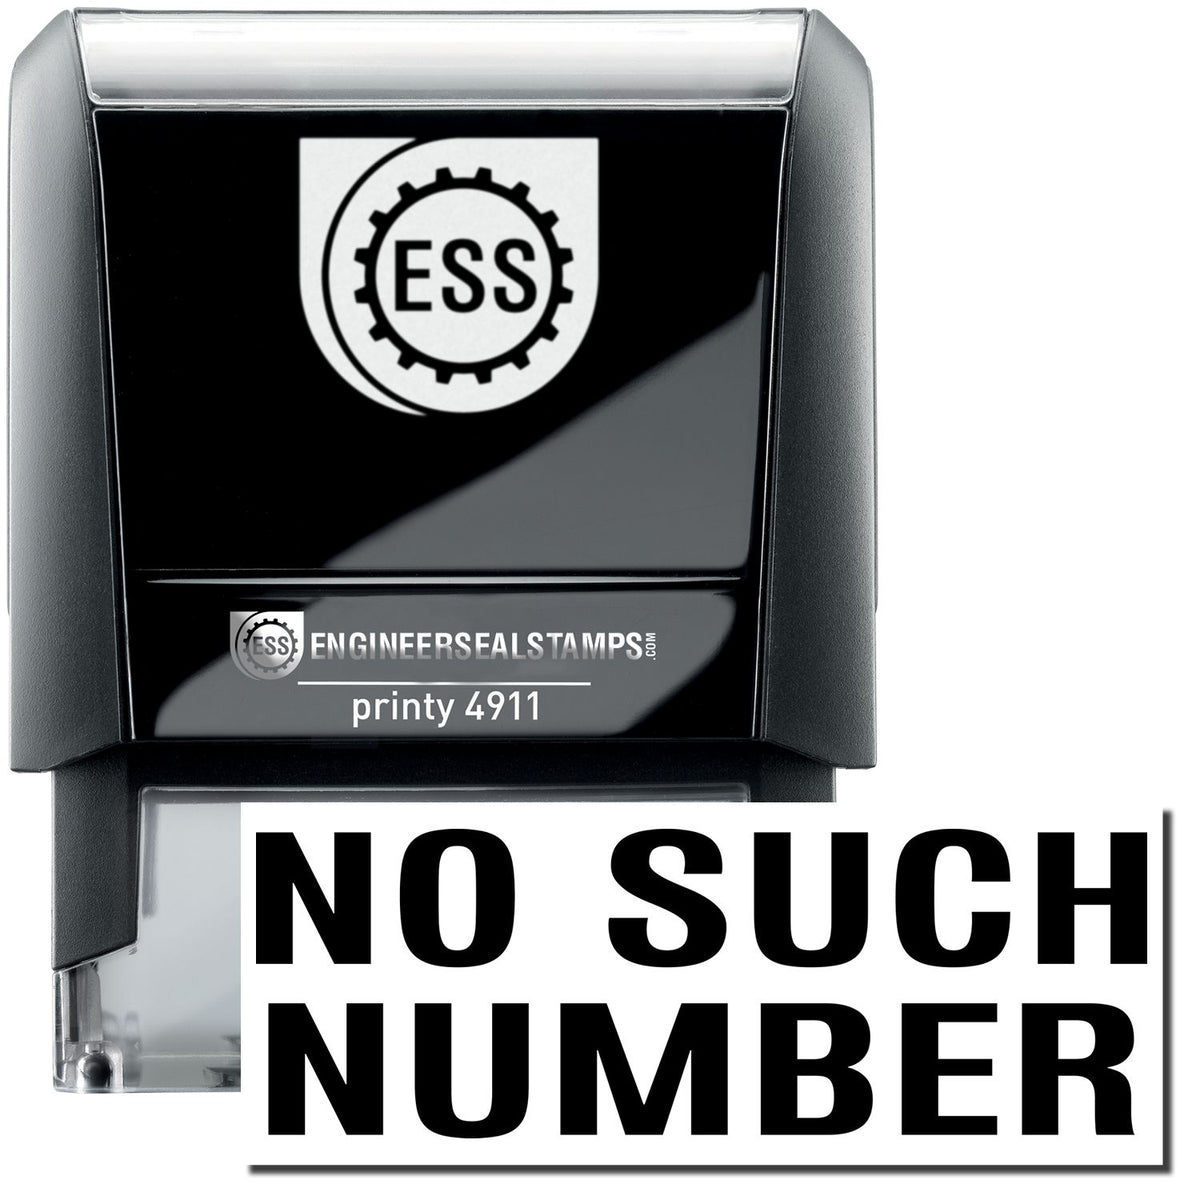 A self-inking stamp with a stamped image showing how the text &quot;NO SUCH NUMBER&quot; is displayed after stamping.